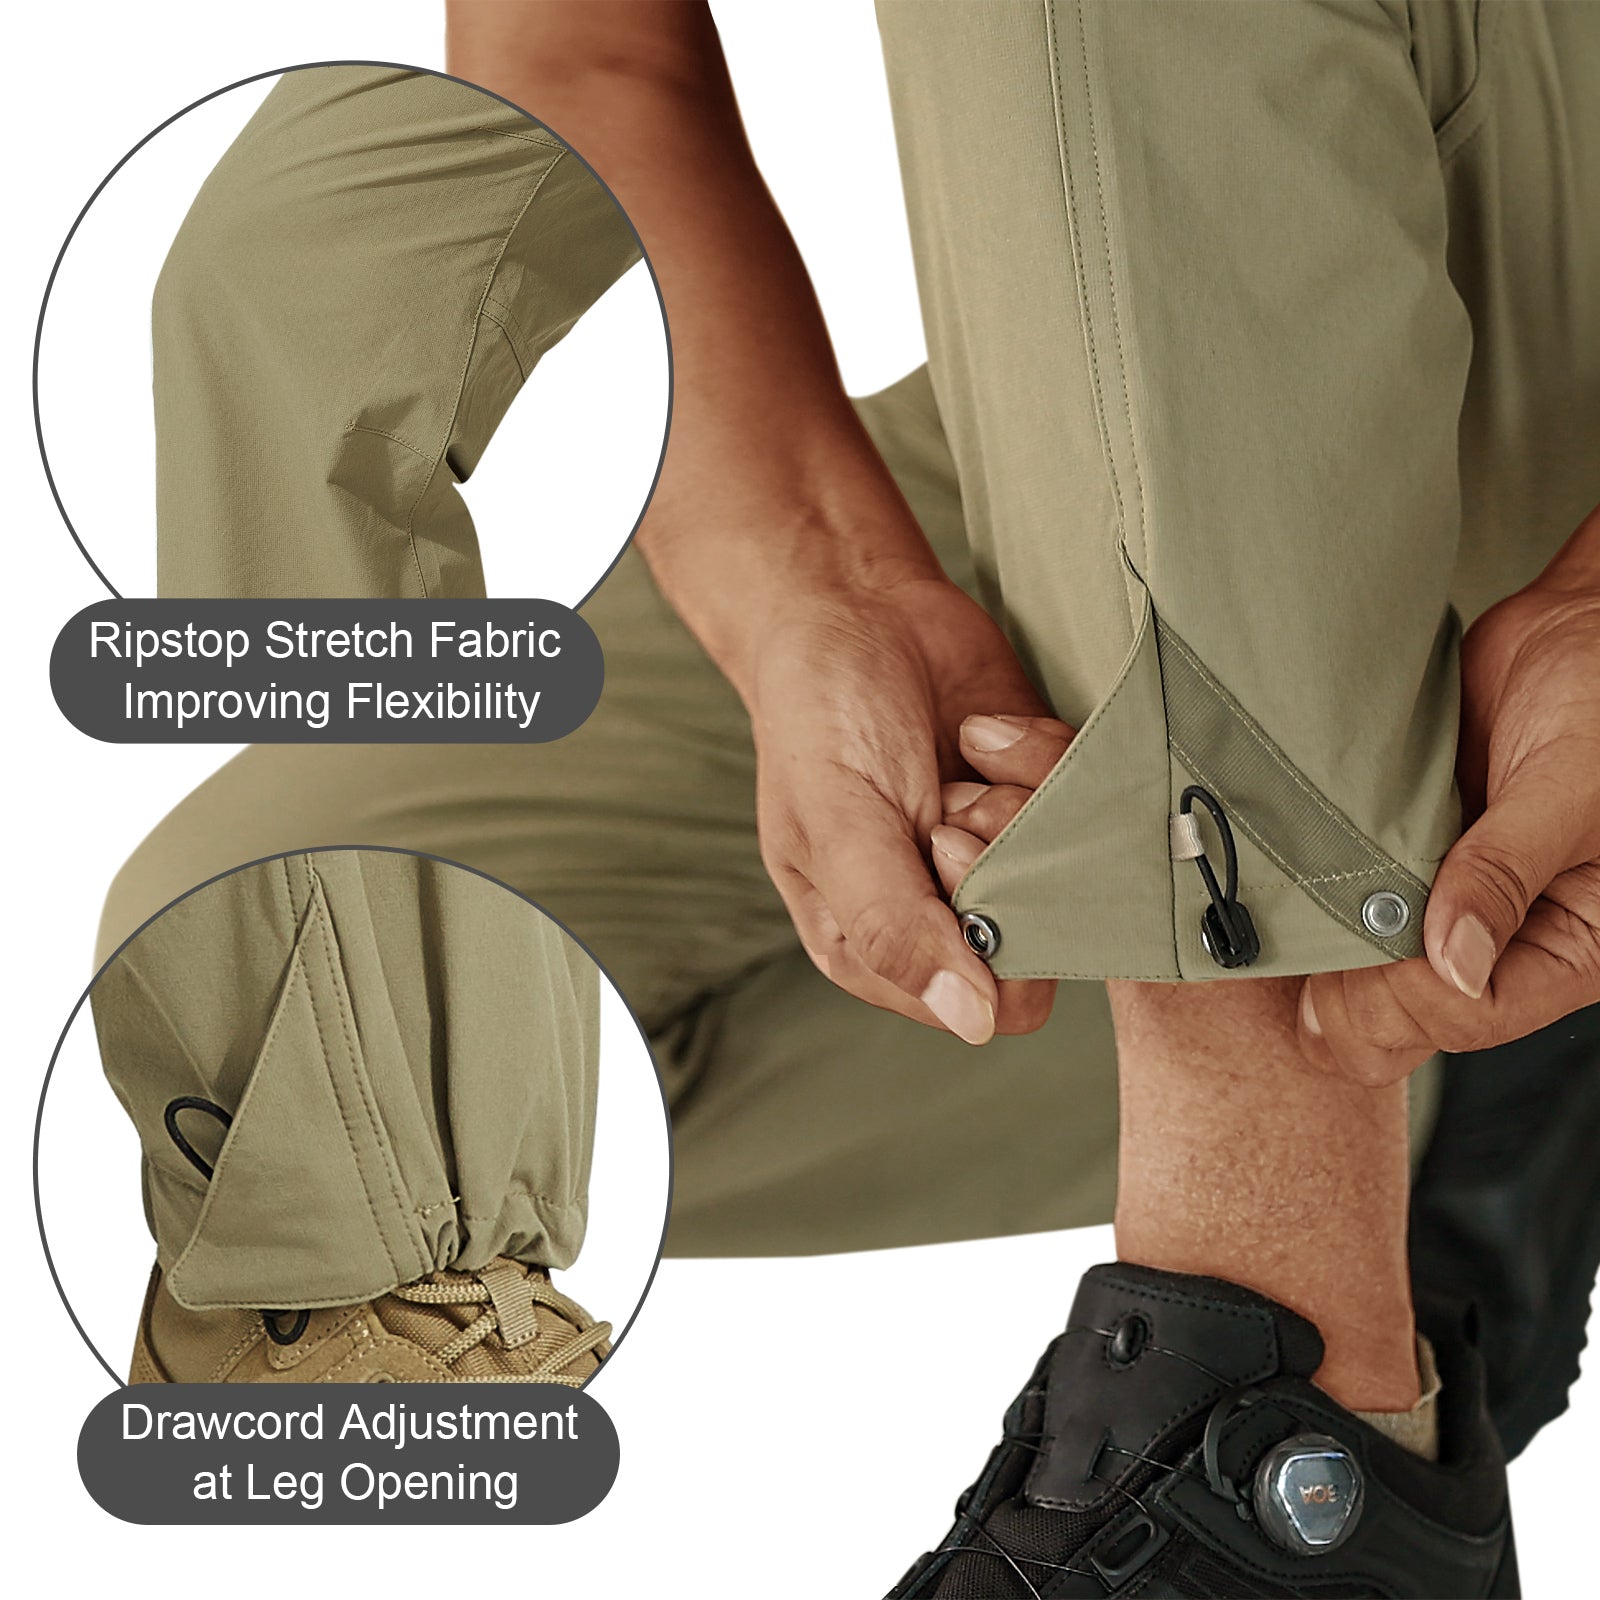 FREE SOLDIER Fast Drying Stretchy Belted Ripstop Hiking Pants